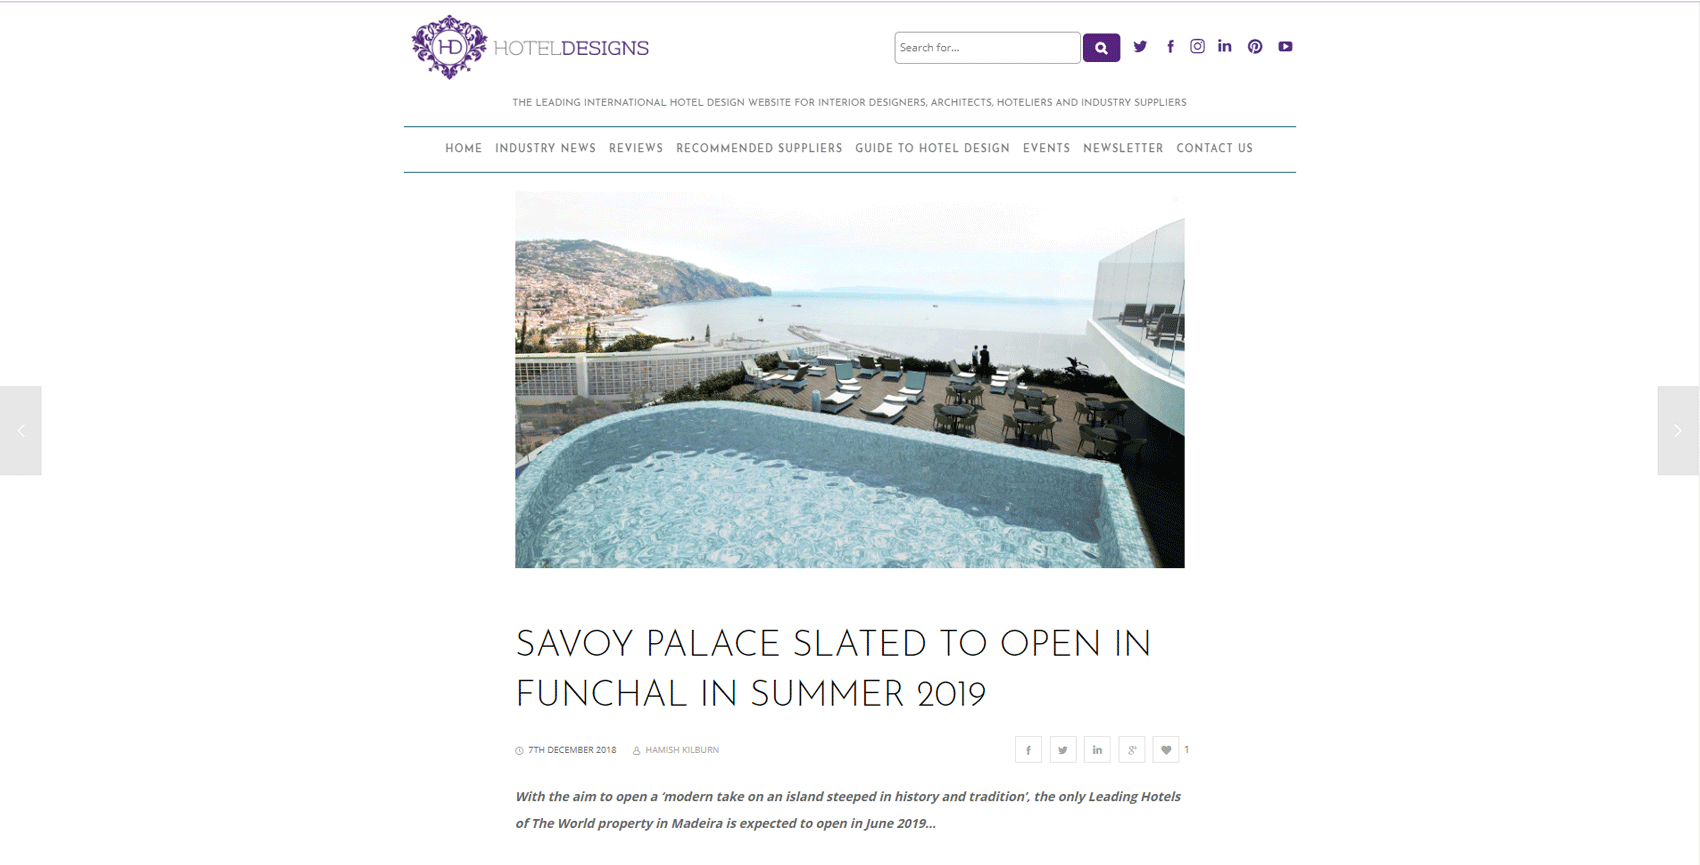 'Savoy Palace Slated to Open in Funchal in Summer 2019', 'Hotel Designs' Website